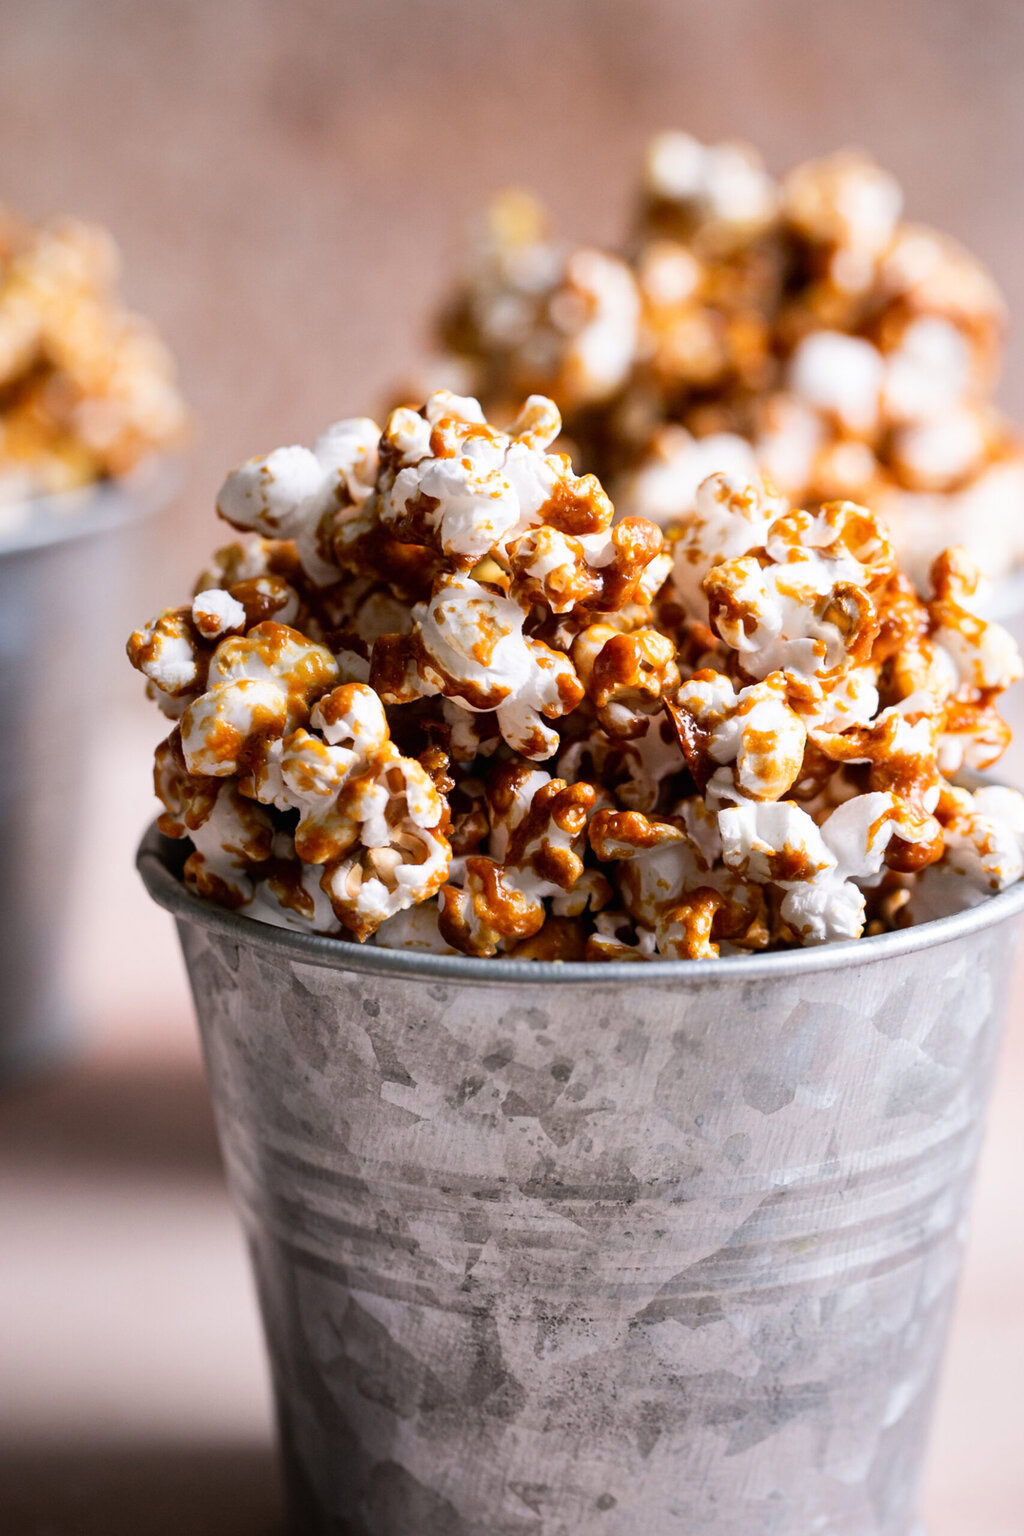 a close up shot of one of the buckets of caramel popcorn